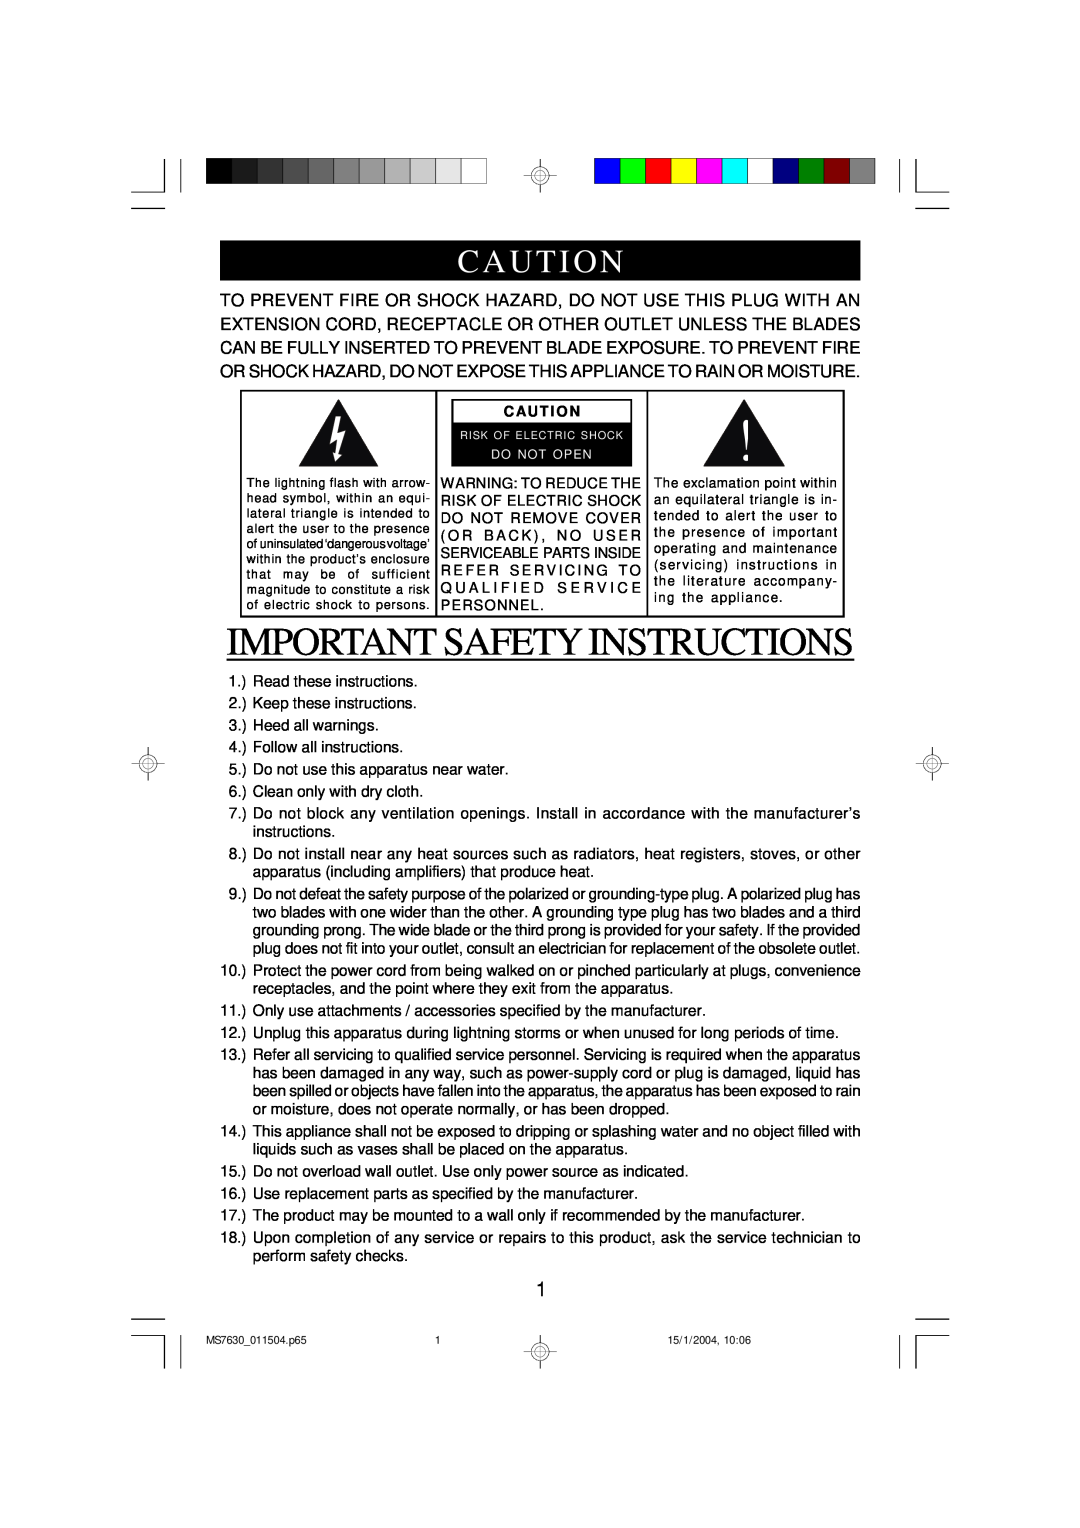 Emerson MS7630 owner manual Important Safety Instructions, Caut I On, Caut I O N 